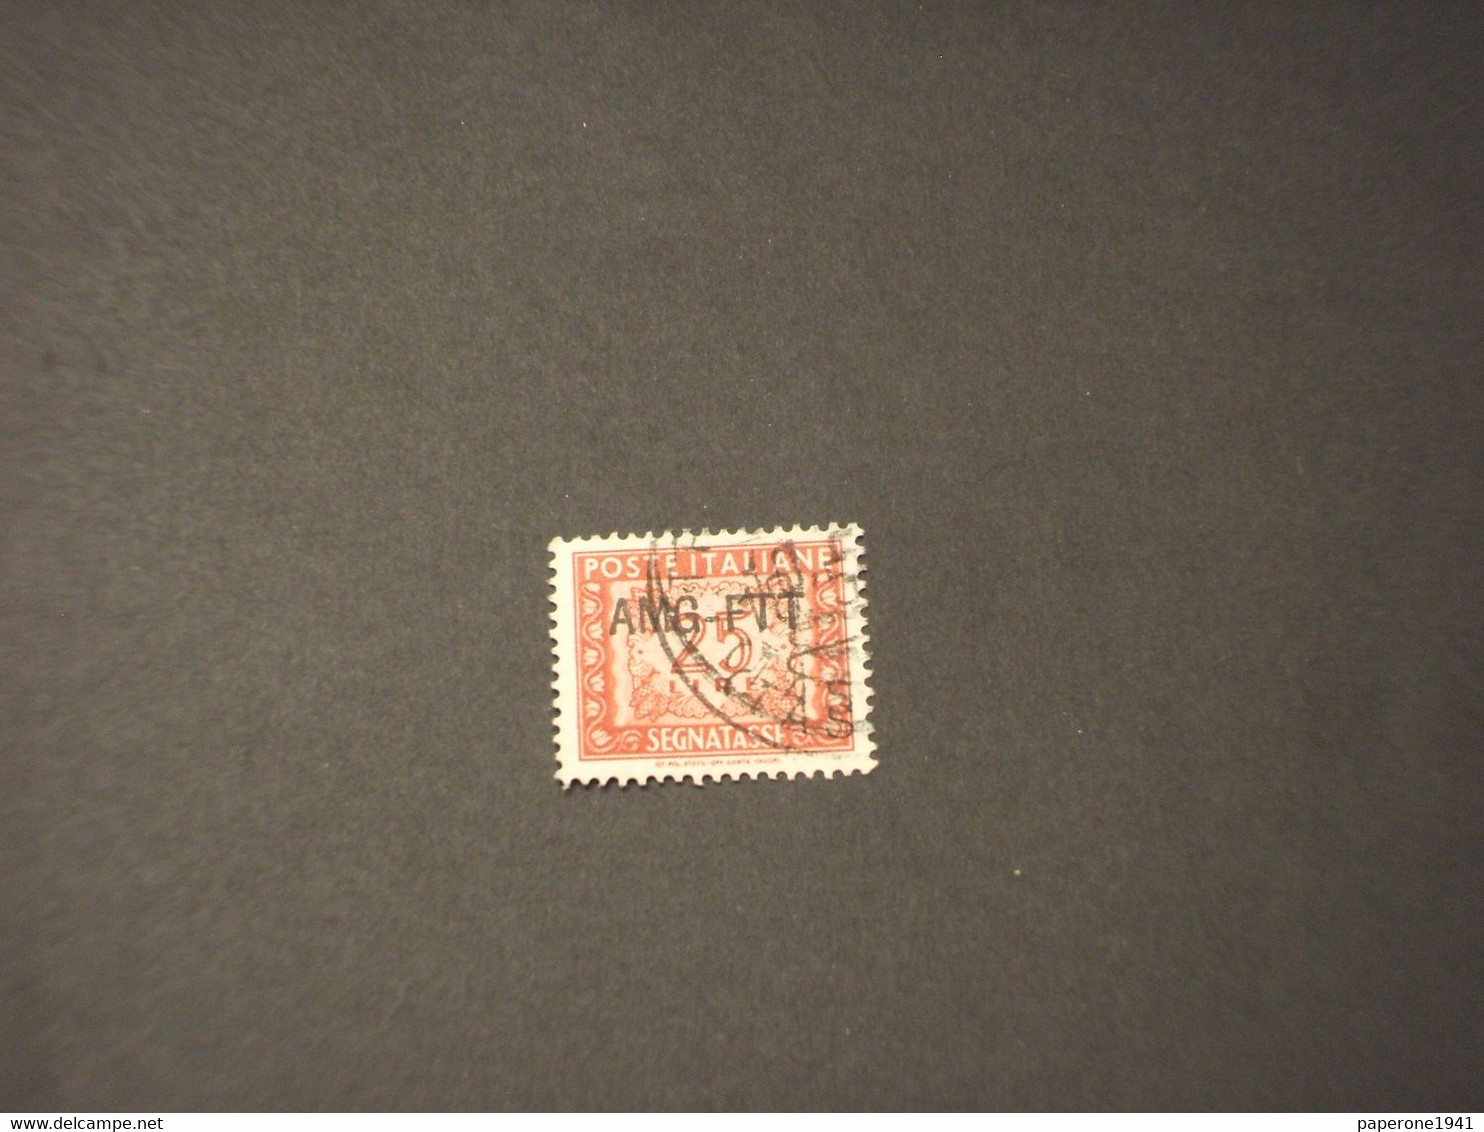 TRIESTE ZONA A - A.M.G.-F.T.T. - Segnatasse - CIFRA L. 25 - TIMBRATO/USED - Postage Due